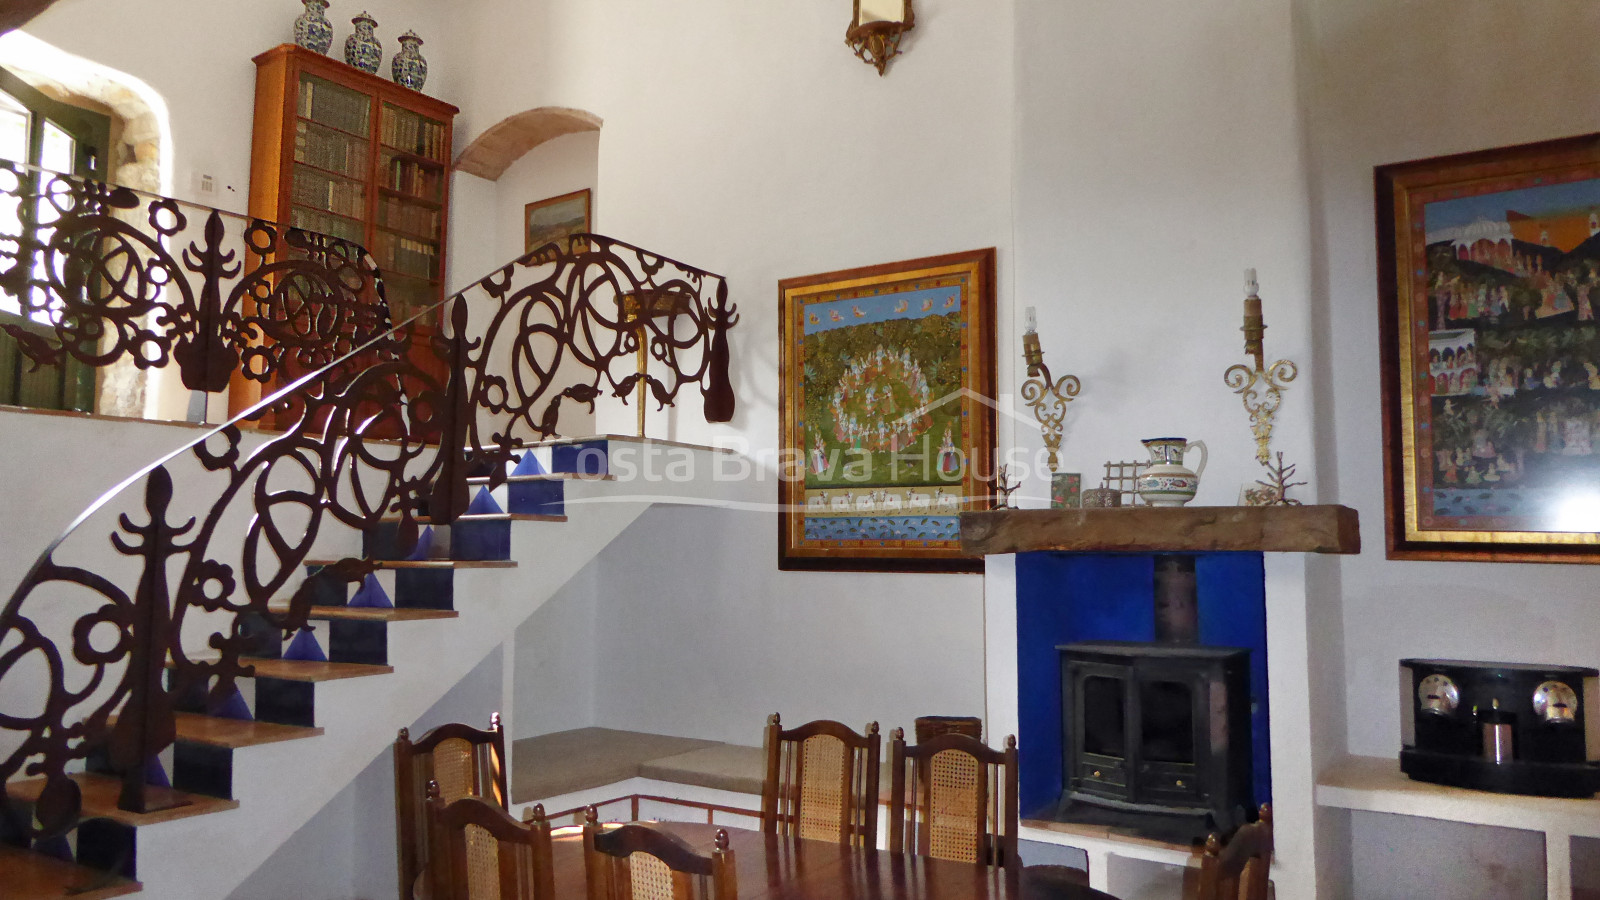 Exclusive finca with two Catalan masias for sale in Sant Martí Vell